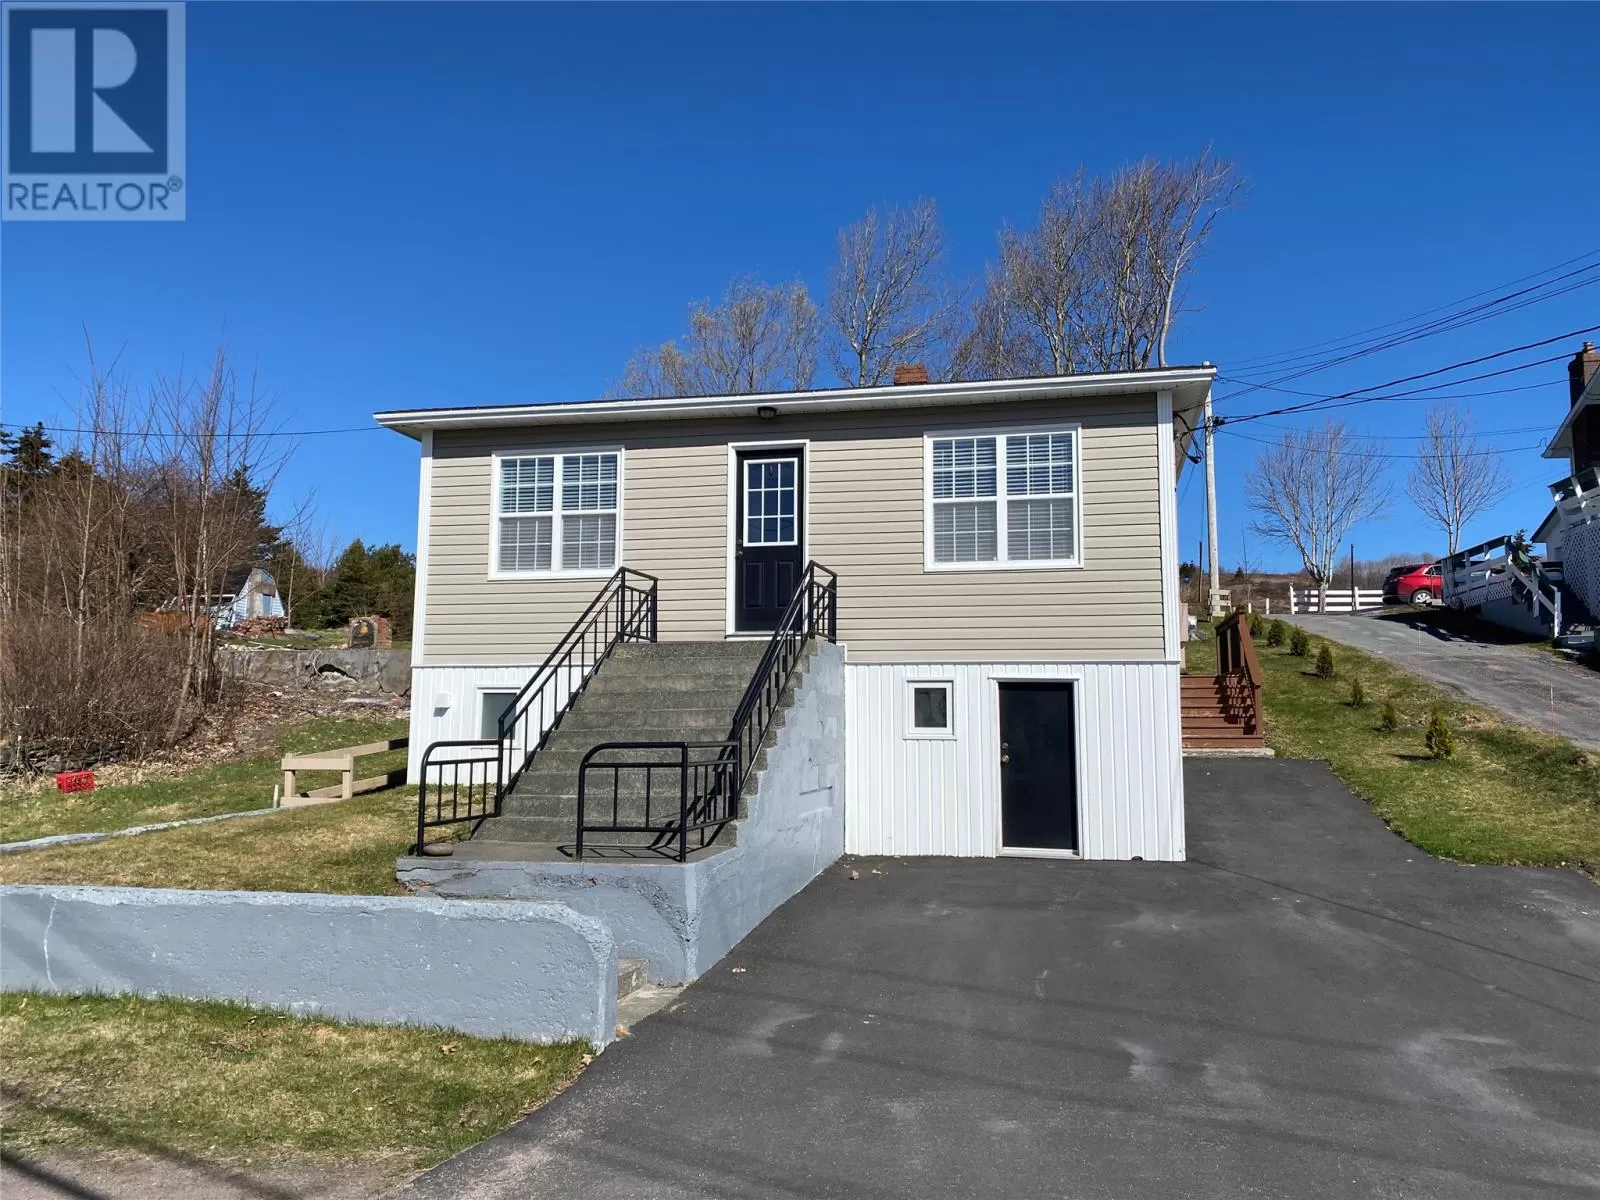 House for rent: 280 Water Street, Harbour Grace, Newfoundland & Labrador A0A 2M0